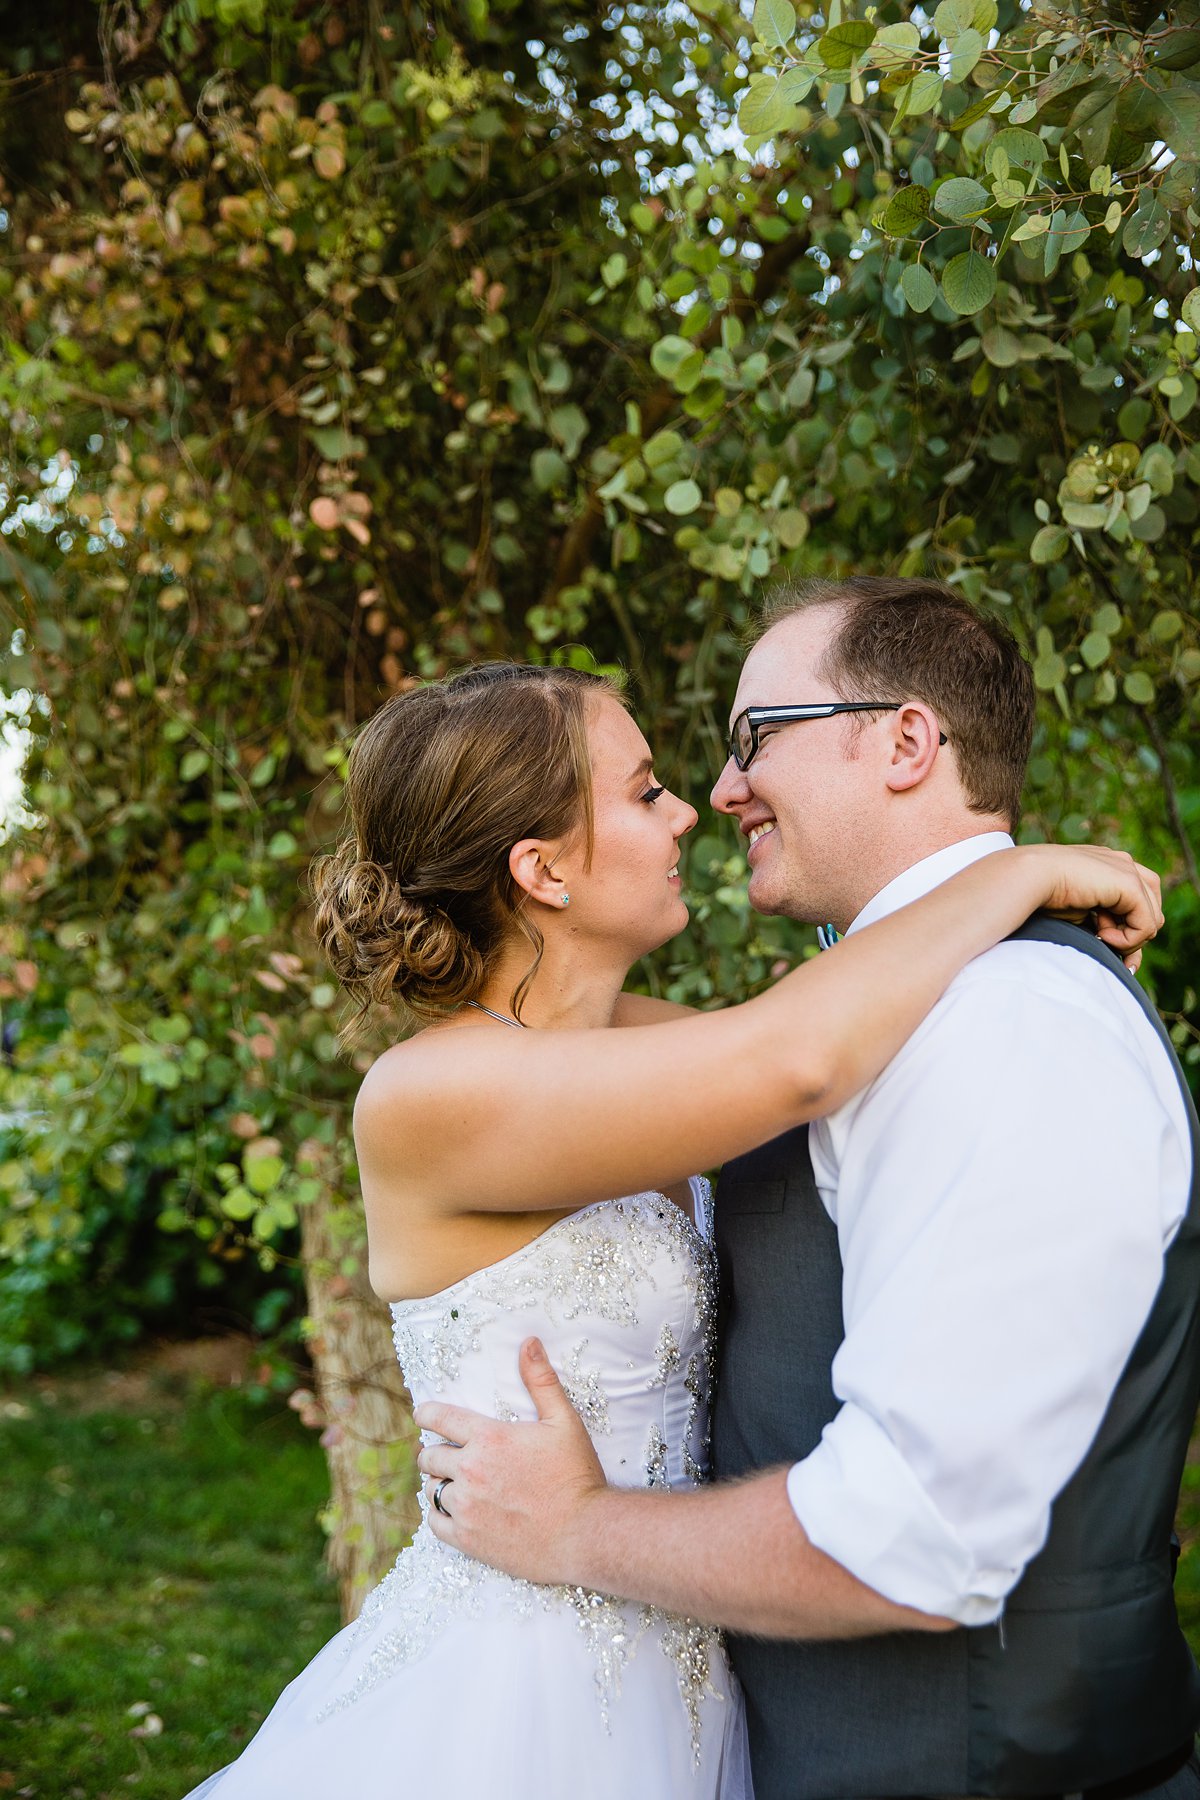 Bride and groom share an intimate moment at a DIY backyard wedding by Phoenix wedding photographer PMA Photography.